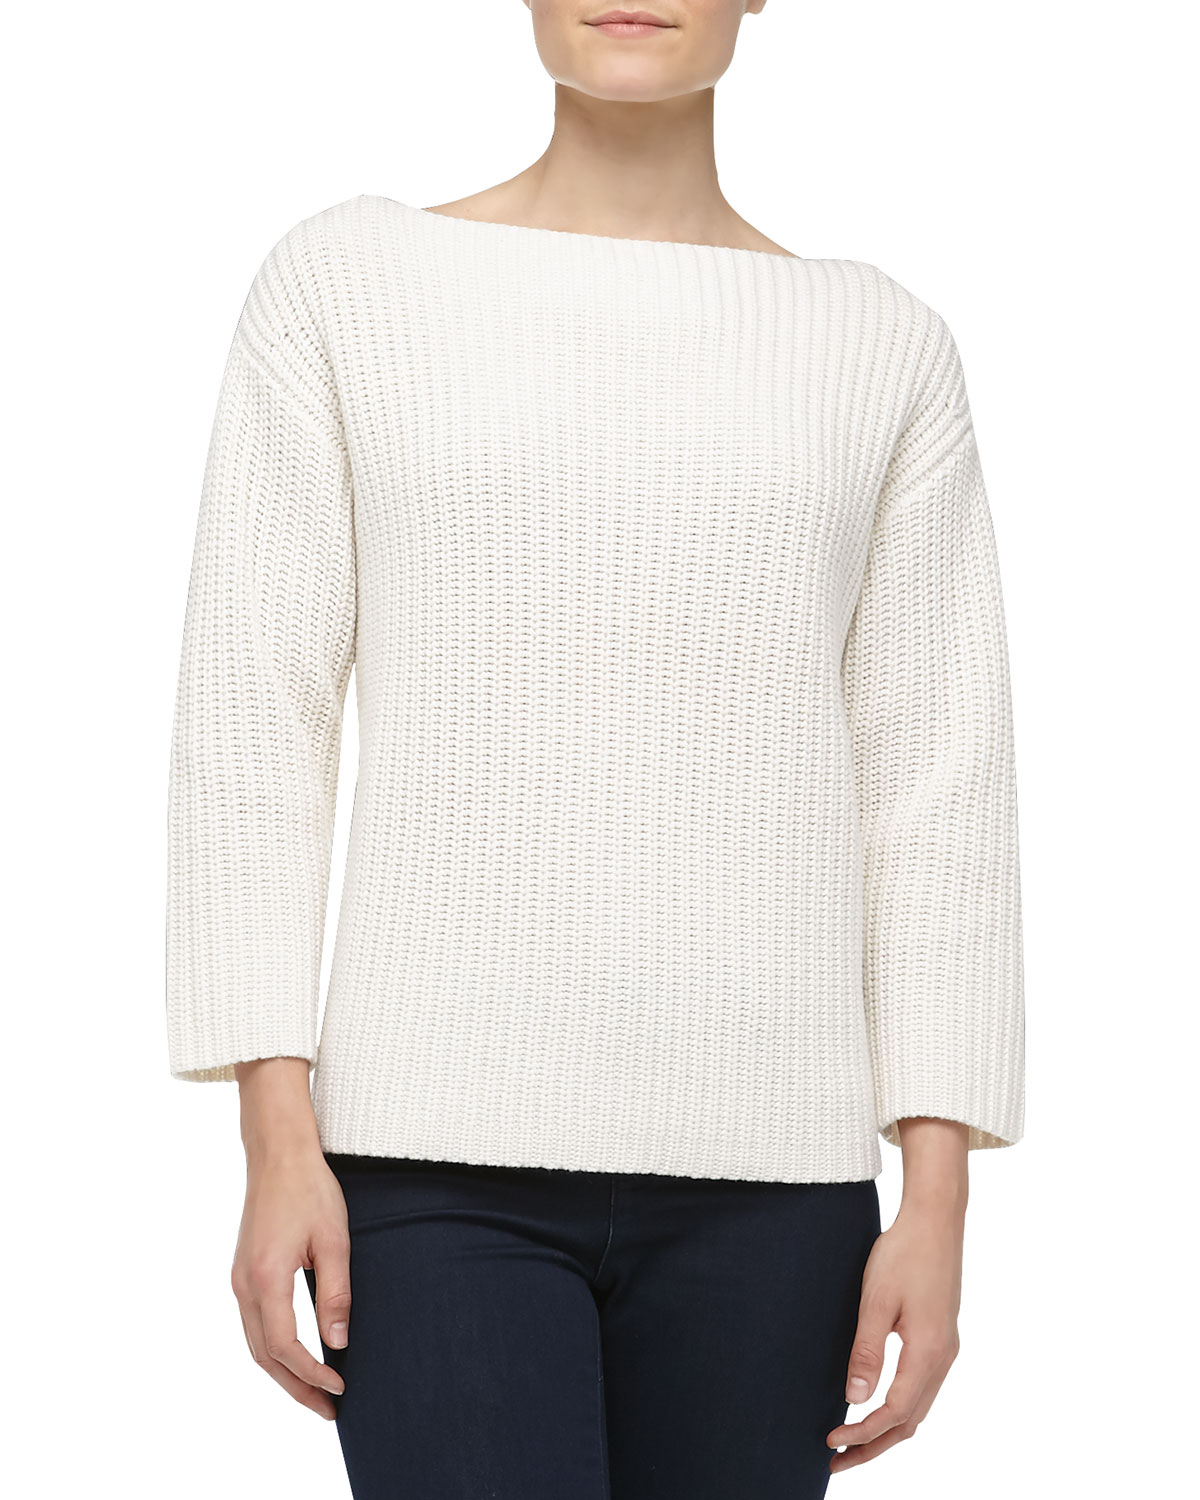 Michael kors Boxy Cashmere Shaker-Knit Sweater in White | Lyst